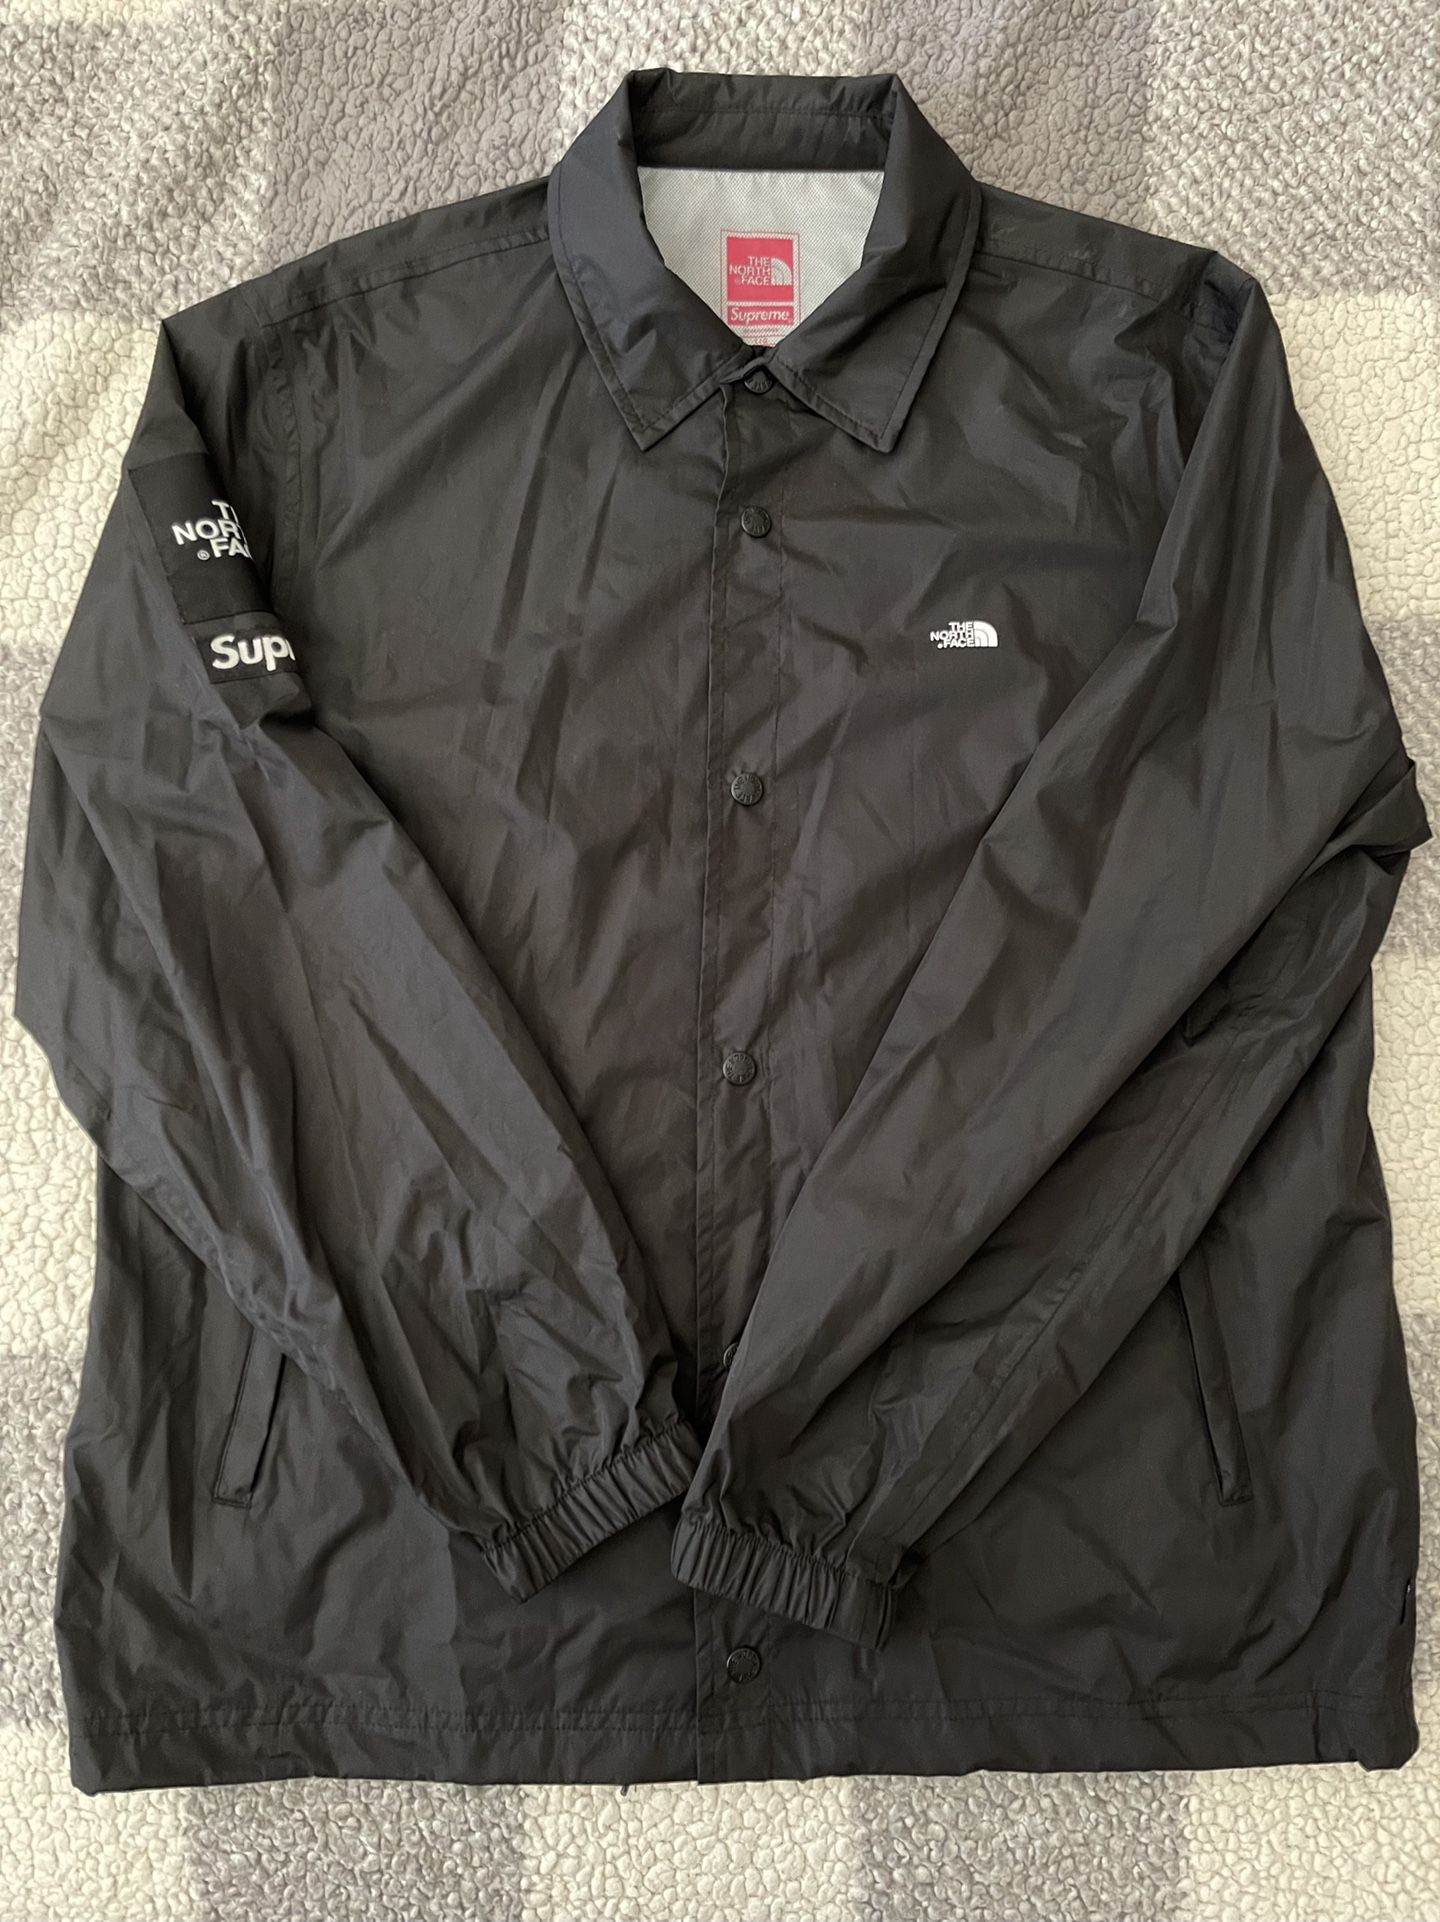 Supreme North Face SS15 Coaches Jacket